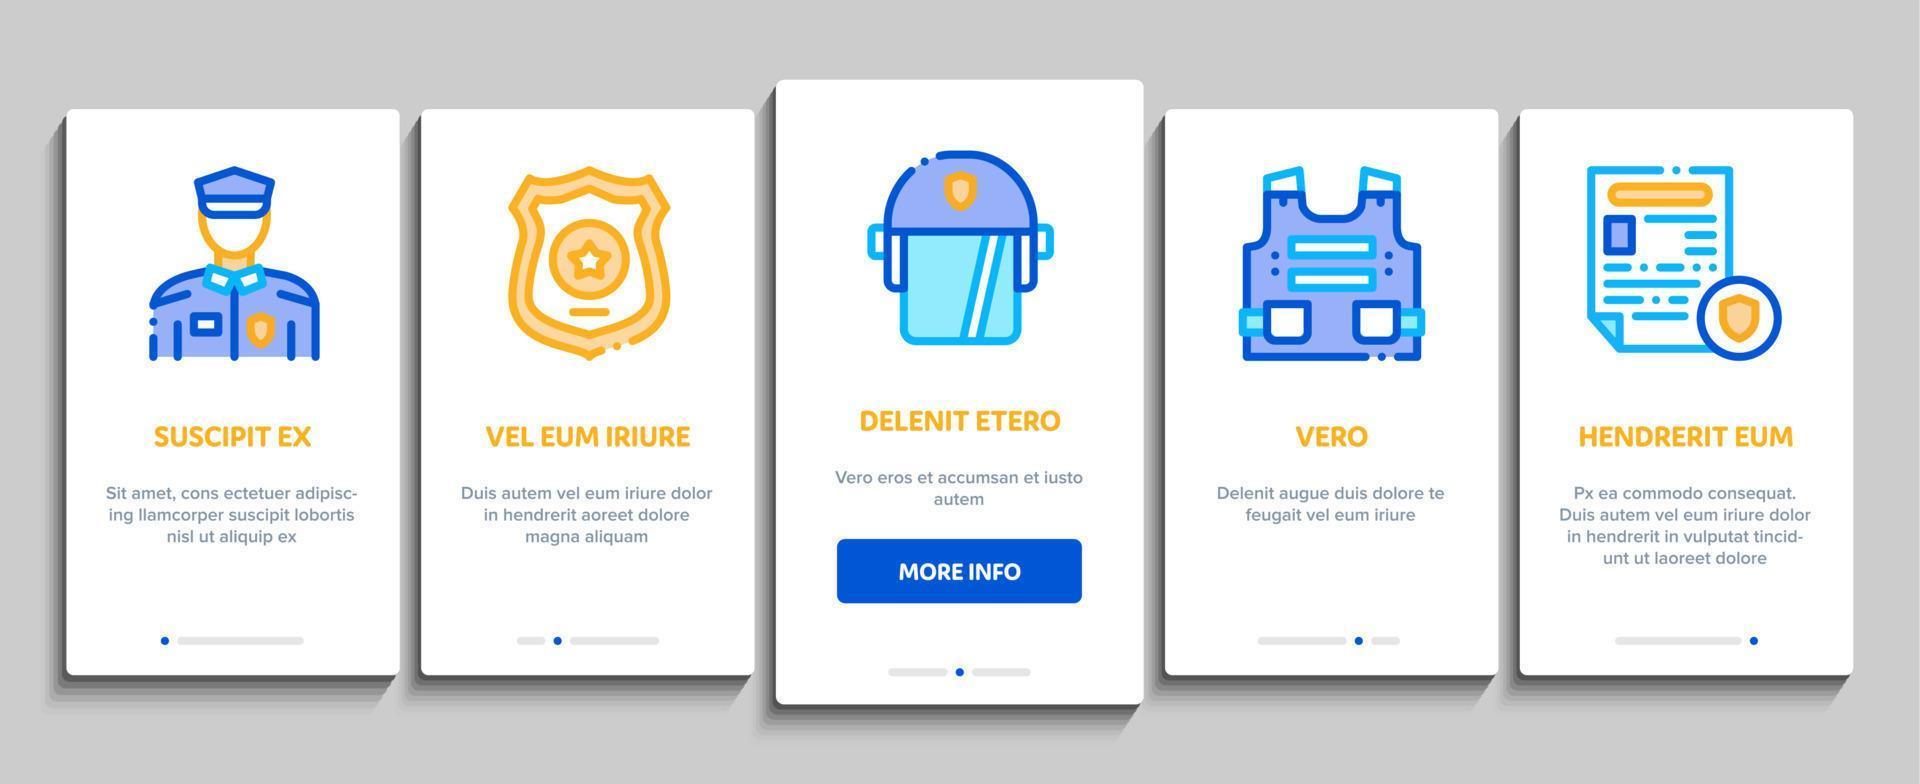 Police Department Onboarding Elements Icons Set Vector